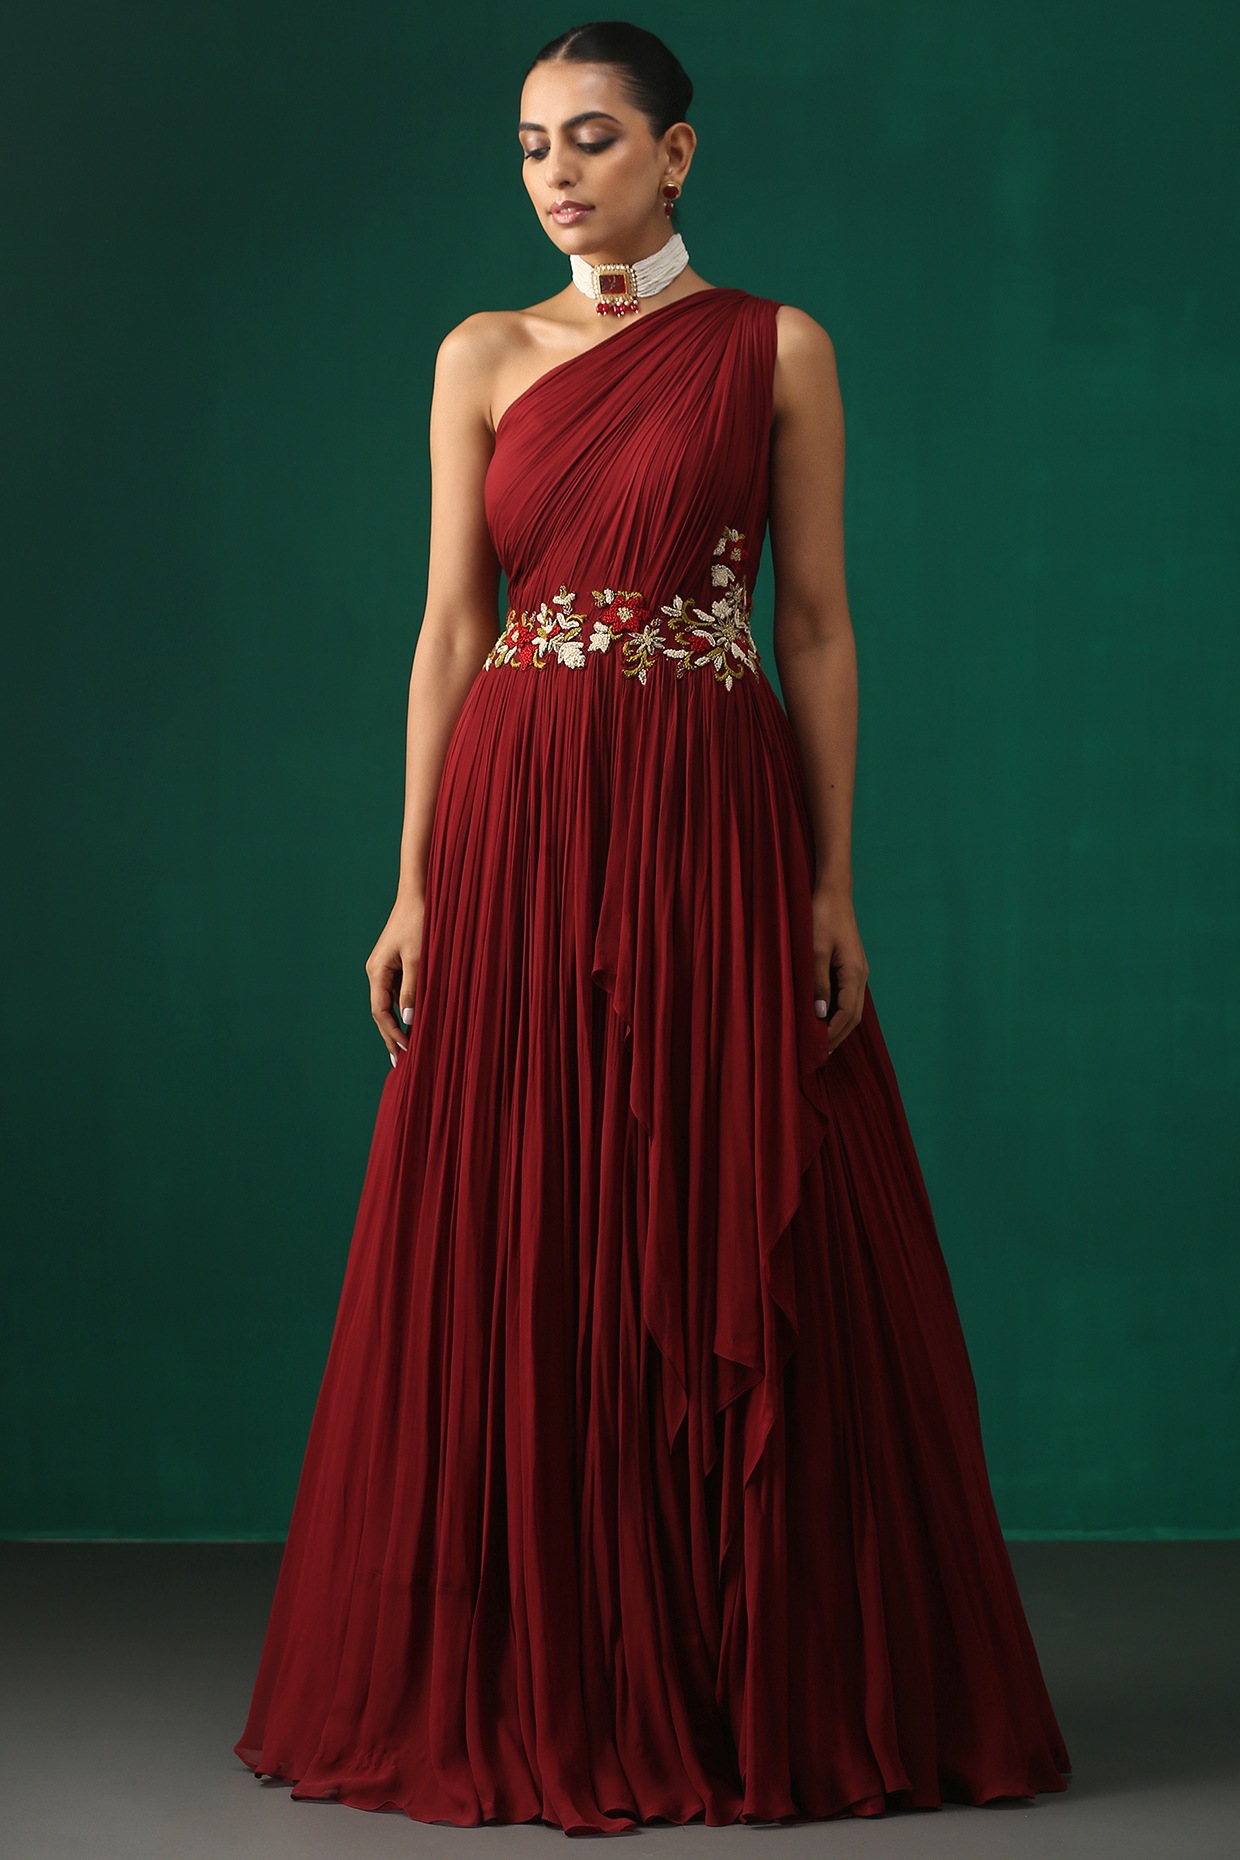 Maroon Embroidered Kaftan Gown | Kaftan gown, Gowns, Chic maxi dresses